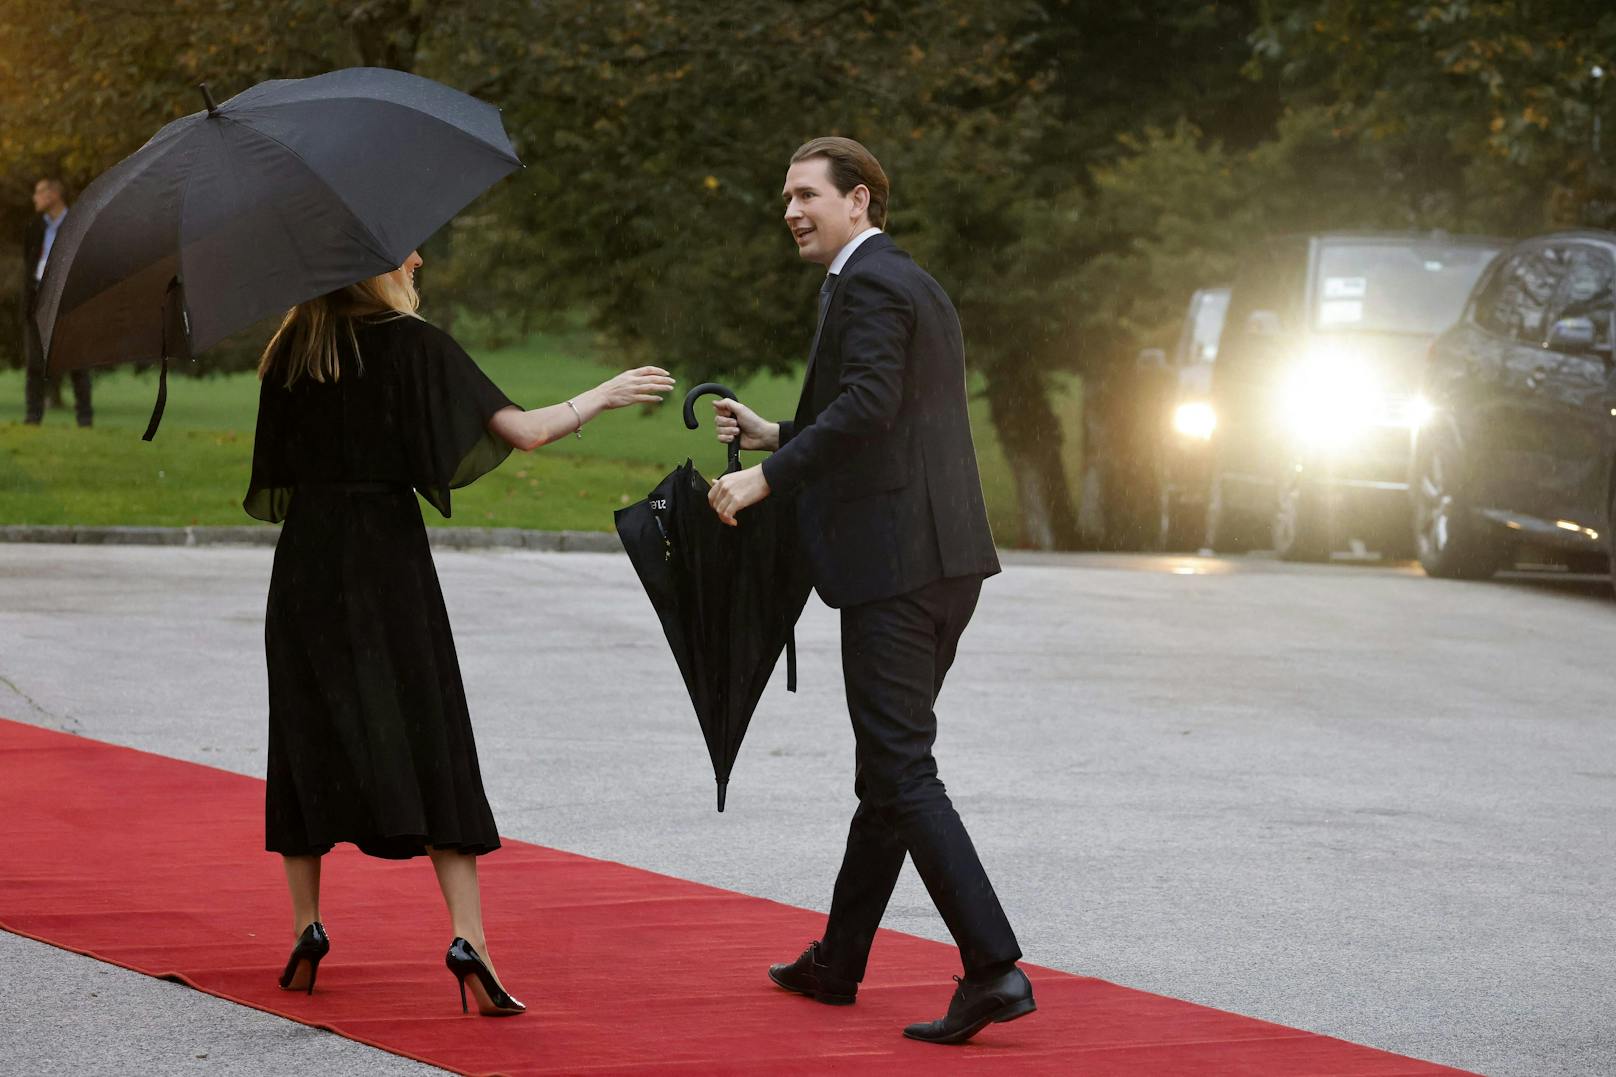 Download von www.picturedesk.com am 06.10.2021 (18:02). 
Austria's Chancellor Sebastian Kurz arrives for the EU-Western Balkans summit at Brdo Castle in Kranj on October 5, 2021. - EU leaders will have a hard discussion on Europe's place in the world at a summit, as they seek unity on how to deal with superpowers China and the United States. The 27 heads of state and government will meet at Brdo Castle in Slovenia, the country that currently holds the EU's rotating presidency. (Photo by Ludovic MARIN / AFP) - 20211005_PD6600 - Rechteinfo: Rights Managed (RM) Nur für redaktionelle Nutzung! Werbliche Nutzung erfordert Freigabe: bitte schicken Sie uns eine Anfrage.